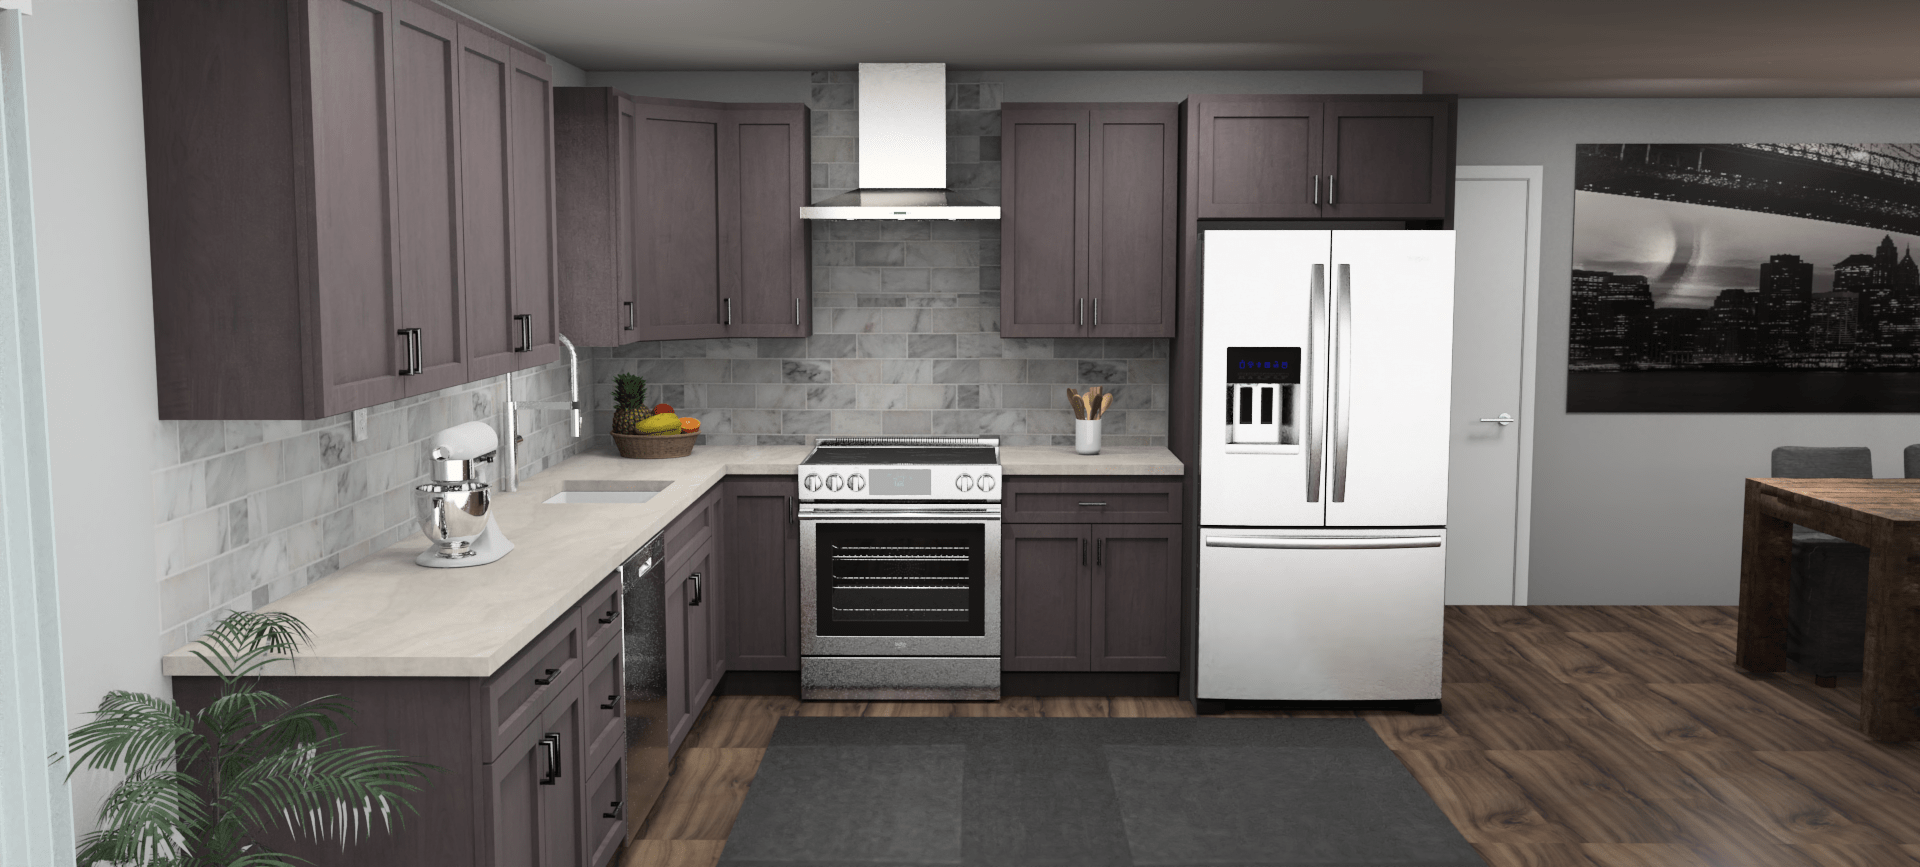 Pioneer The Cinder Grey 12 x 11 L Shaped Kitchen Front Layout Photo